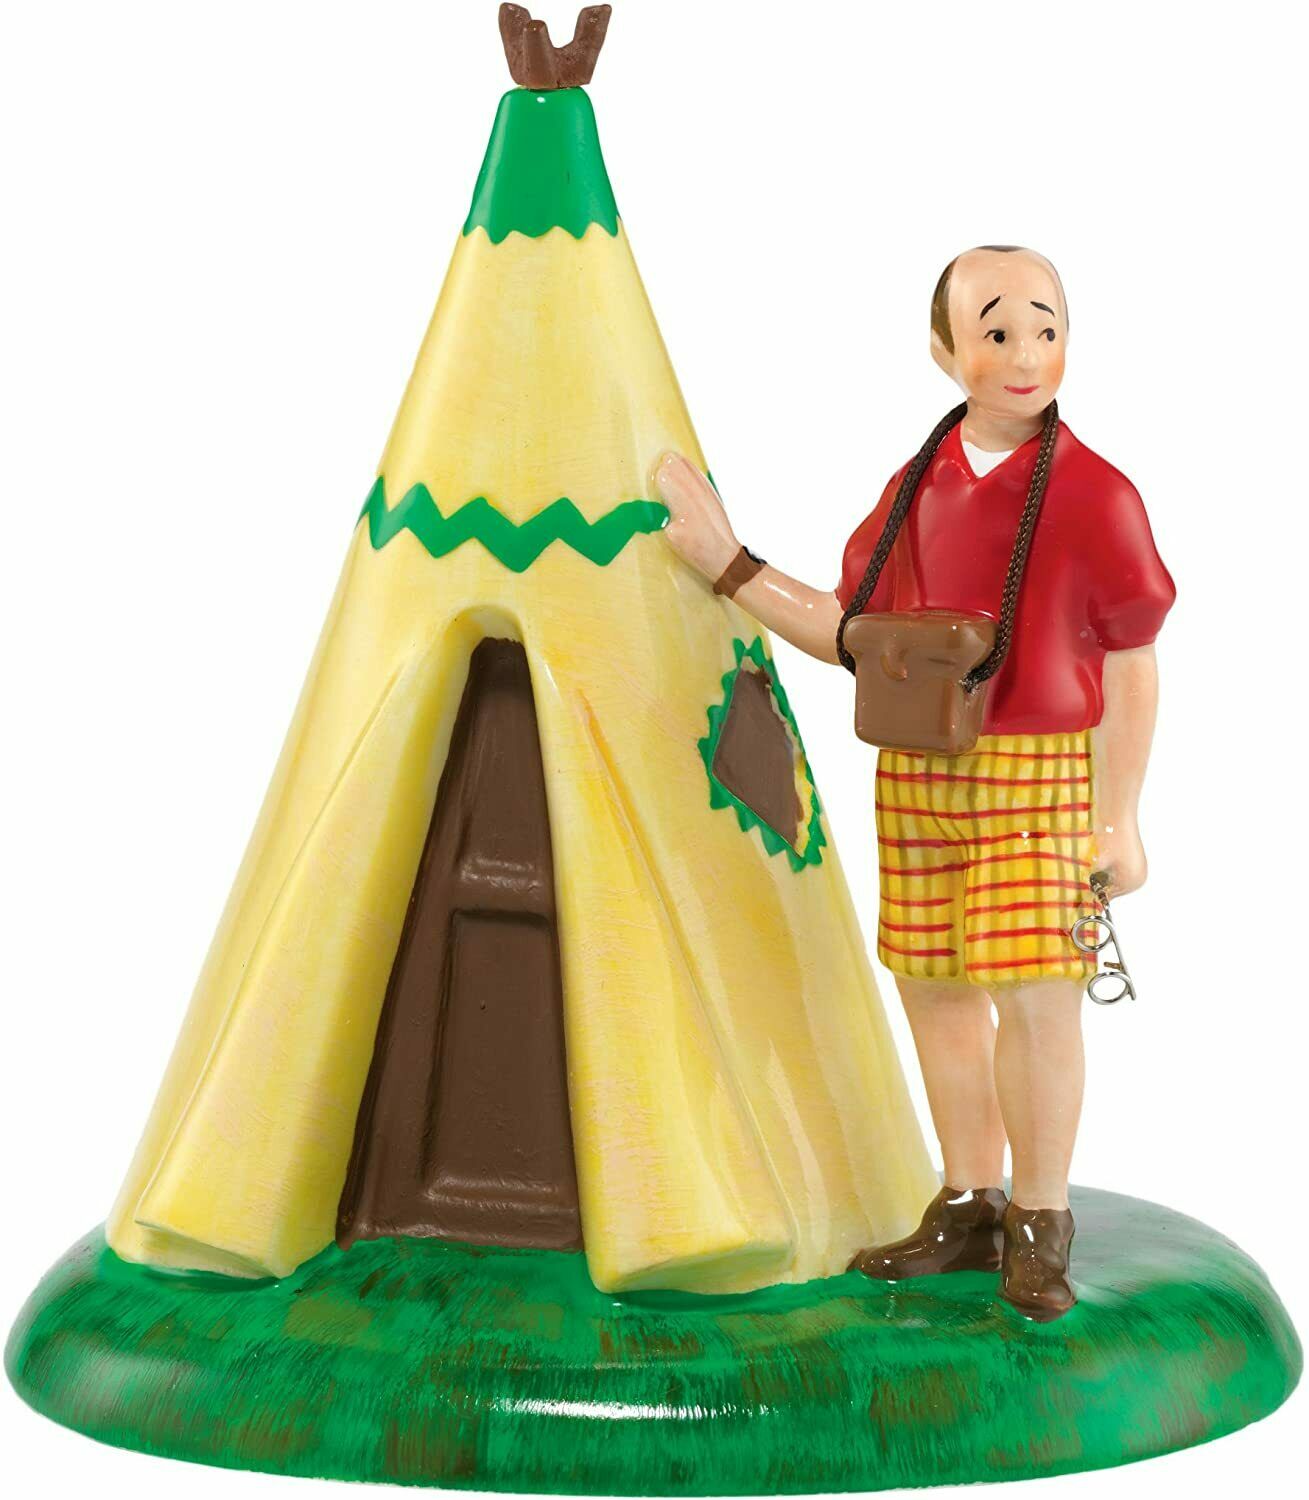 Department 56 Snow Village Travels with Ed Arizona Accessory Figurine, 3.43 inch